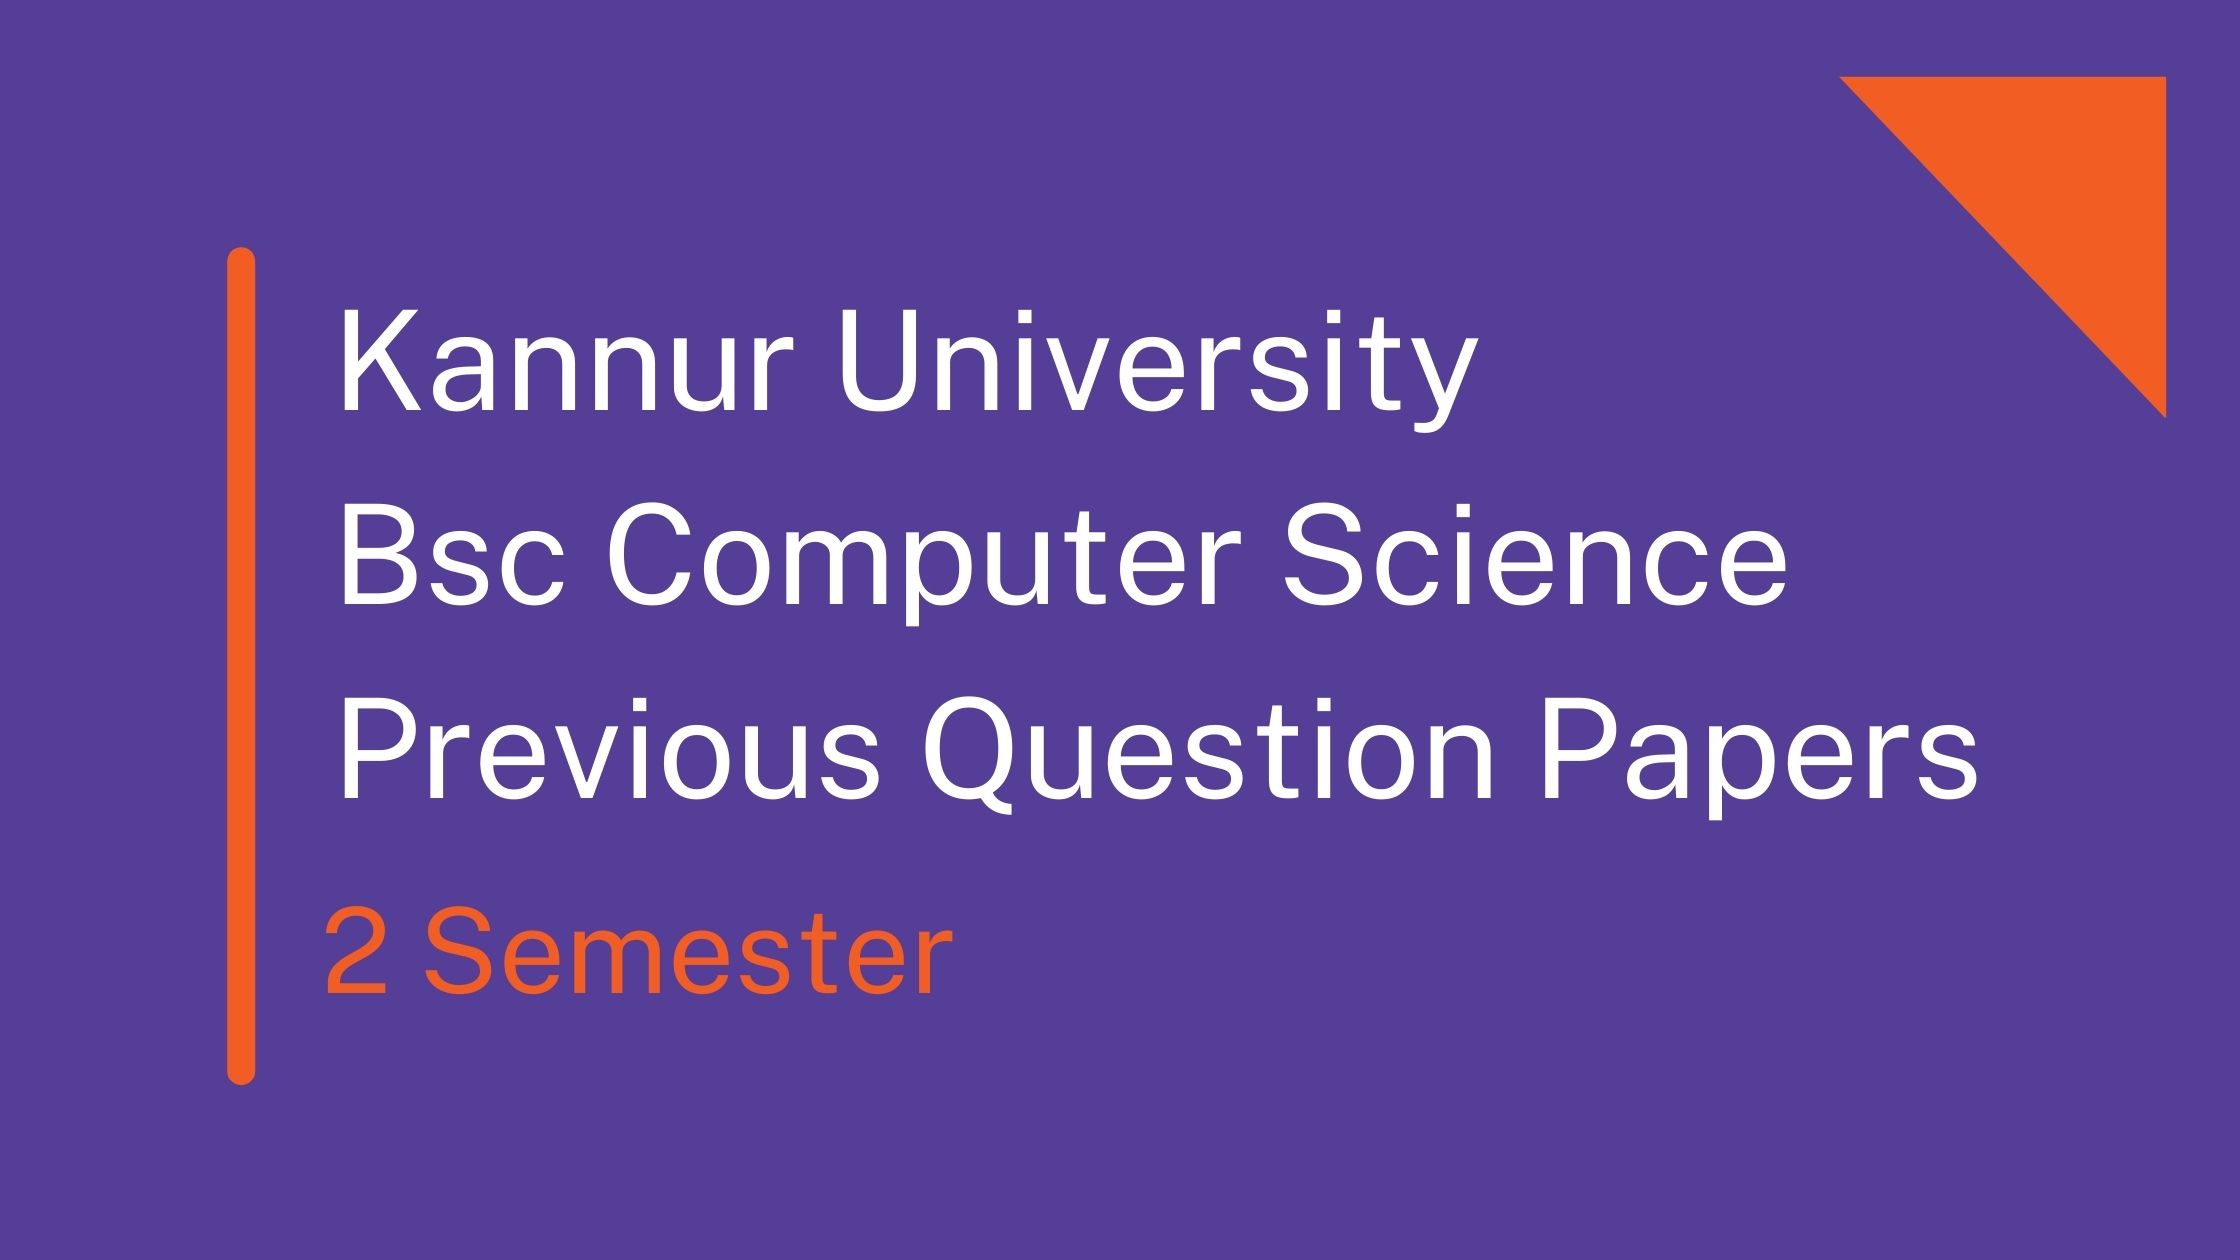 BSc Computer Science Second Semester Previous Question Paper Of Kannur University